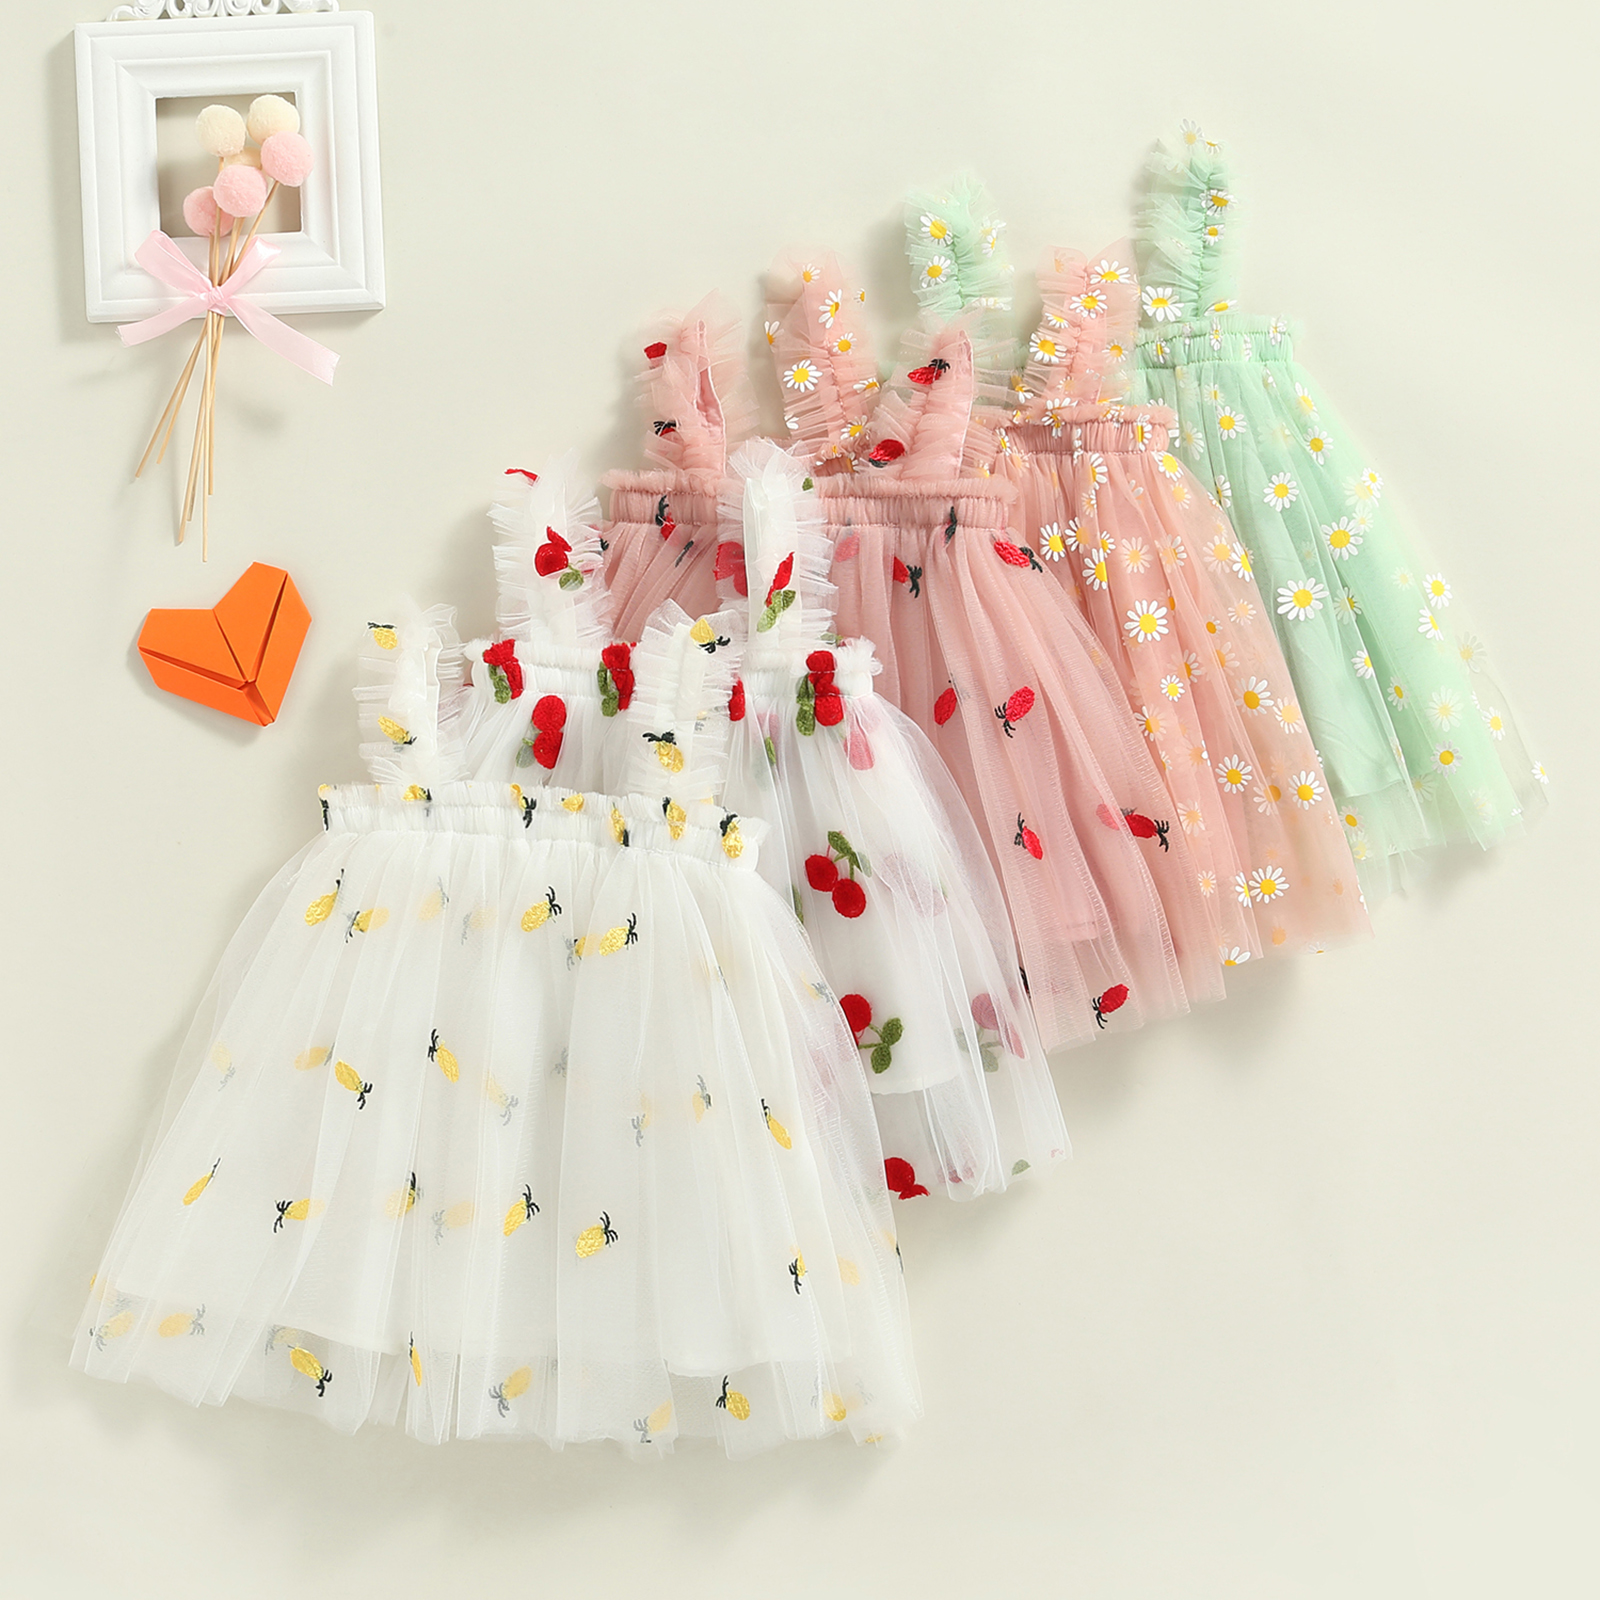 Ma&Baby 6M-5Y Summer Toddler Kid Baby Girls Tulle Dress Daisy Dresses For Girls Party Beach Holiday Clothing D01